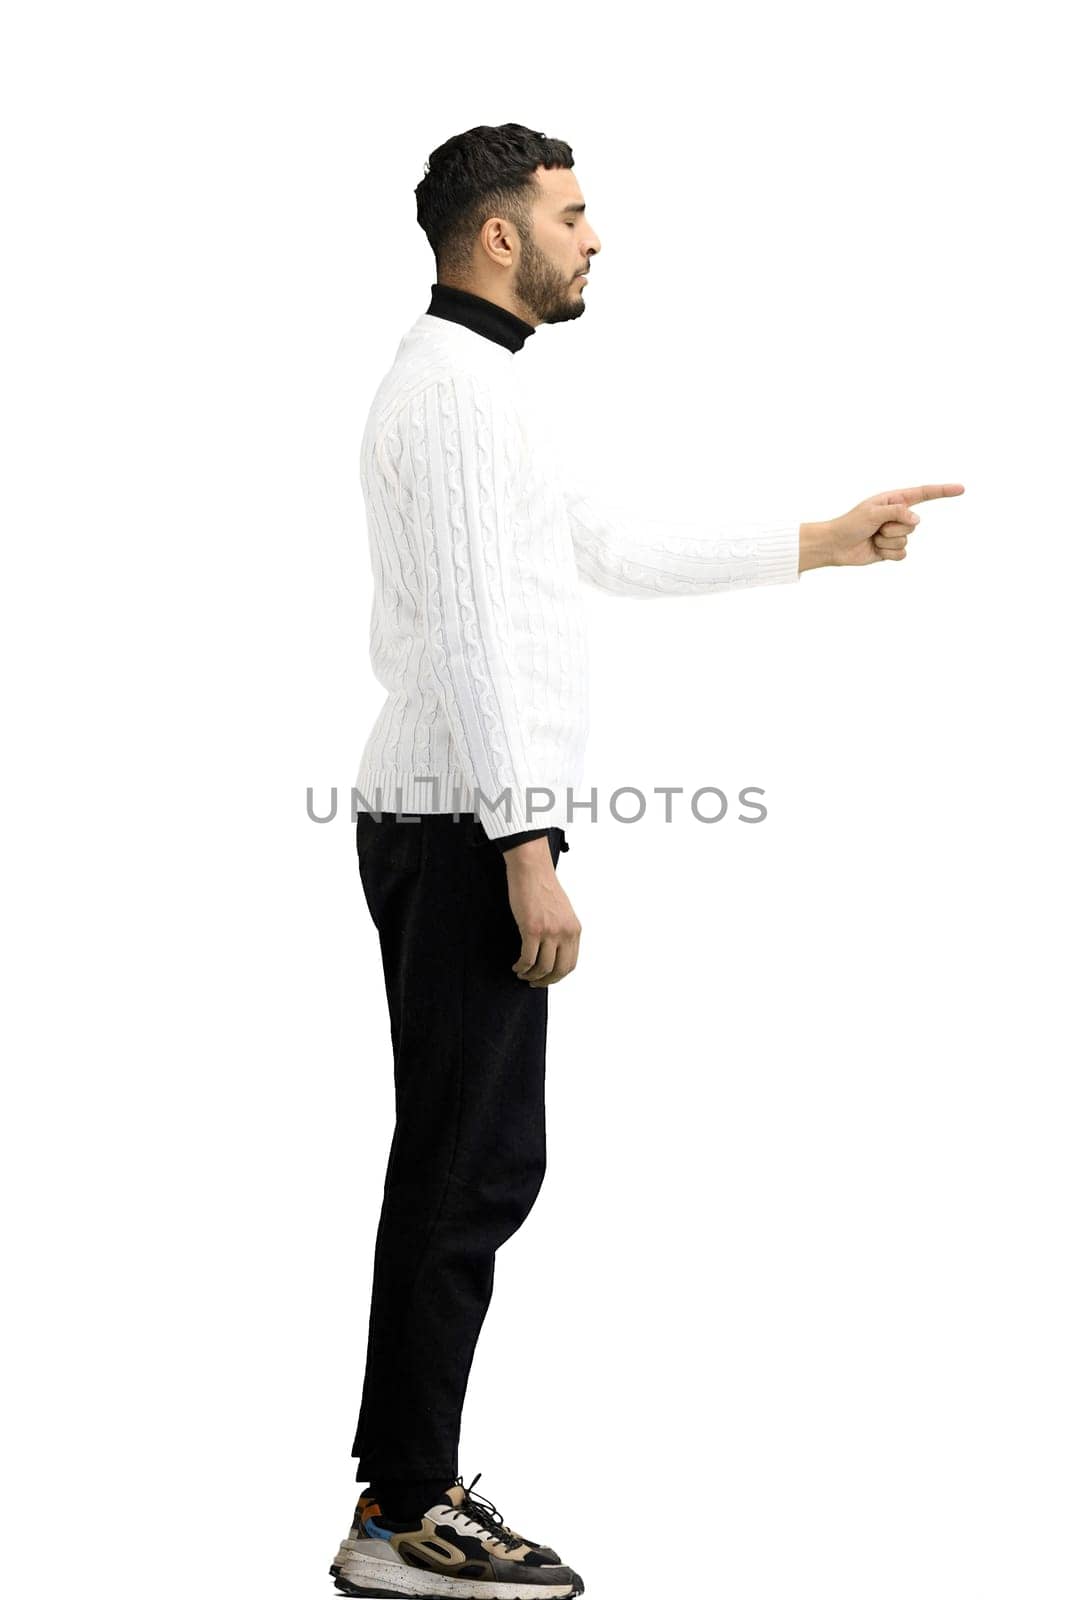 A man, full-length, on a white background, points to the side.